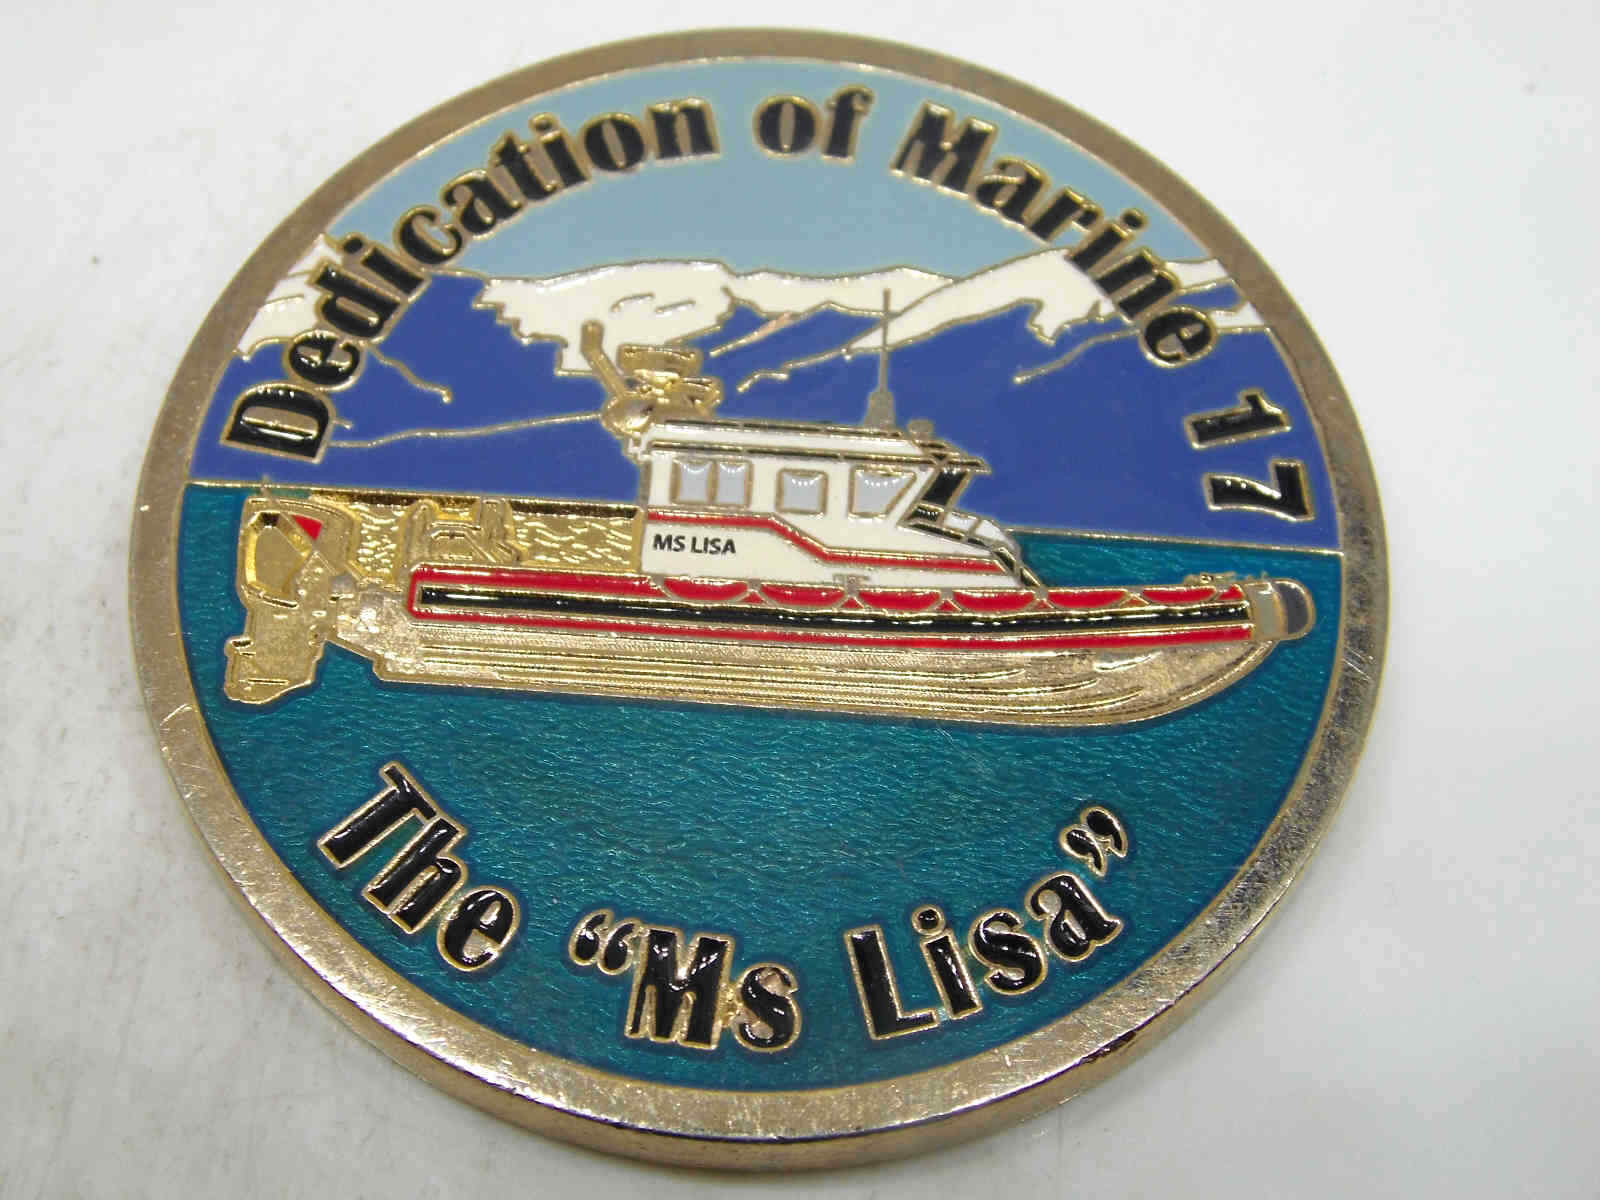 SOUTH LAKE TAHOE FIRE RESCUE DEDICATION OF MARINE 17 MS LISA CHALLENGE COIN